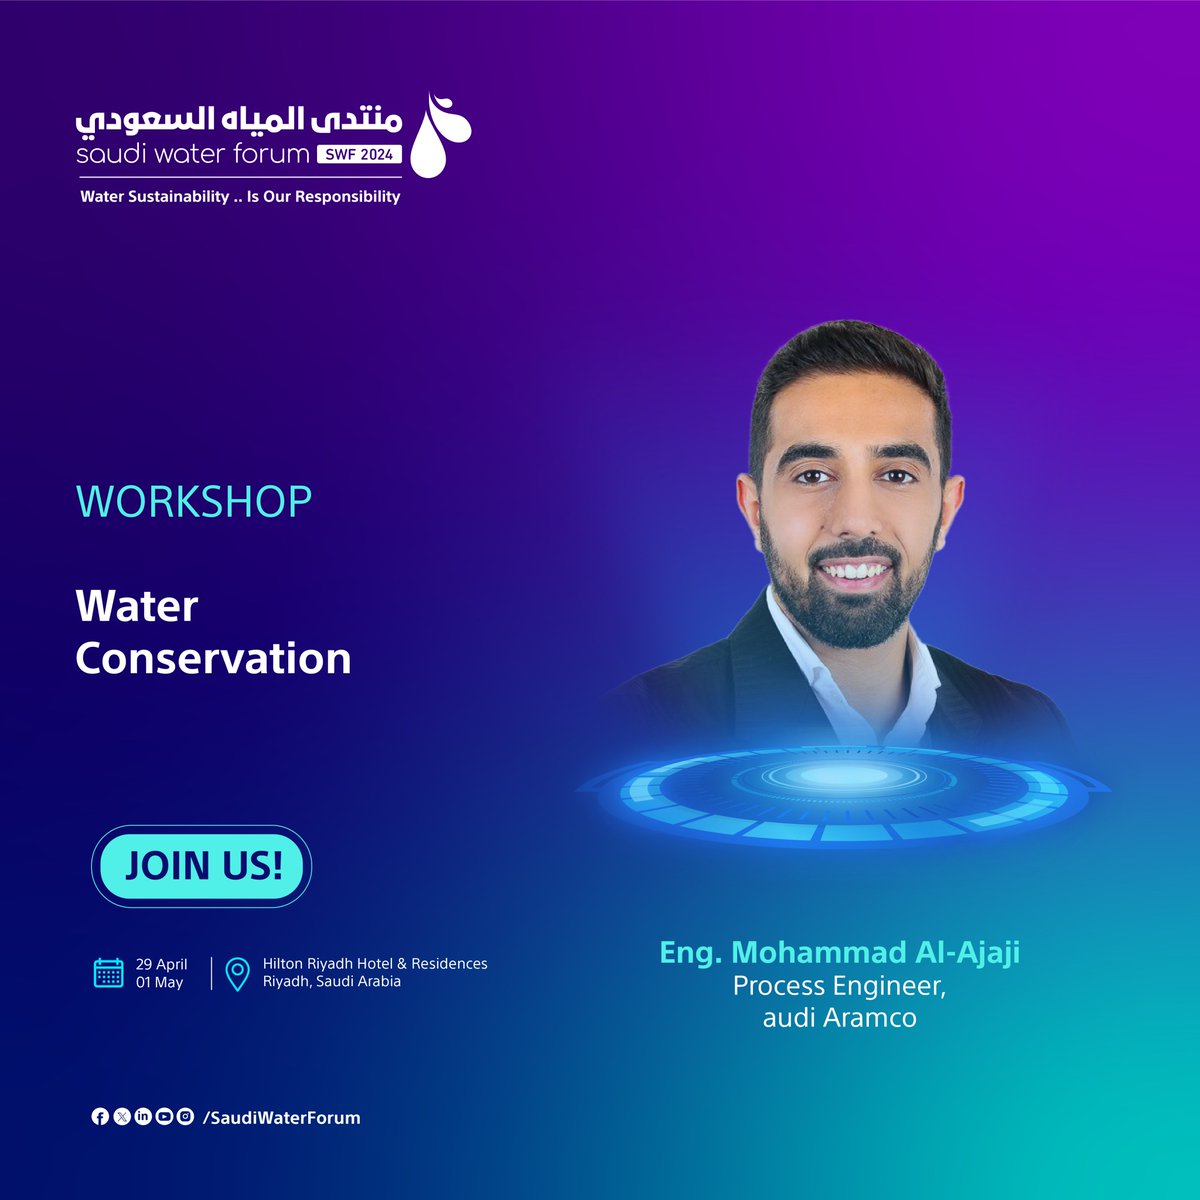 Aramco has a roadmap for water conservation! Join this valuable workshop with Eng. Turki Alfouzan and Eng. Mohammad Al-Ajaji to learn about water conservation programs and water cycle development at the #SaudiWaterForum. 🗓️ 29 April - 01 May 📍Hilton Riyadh Hotel & Residences